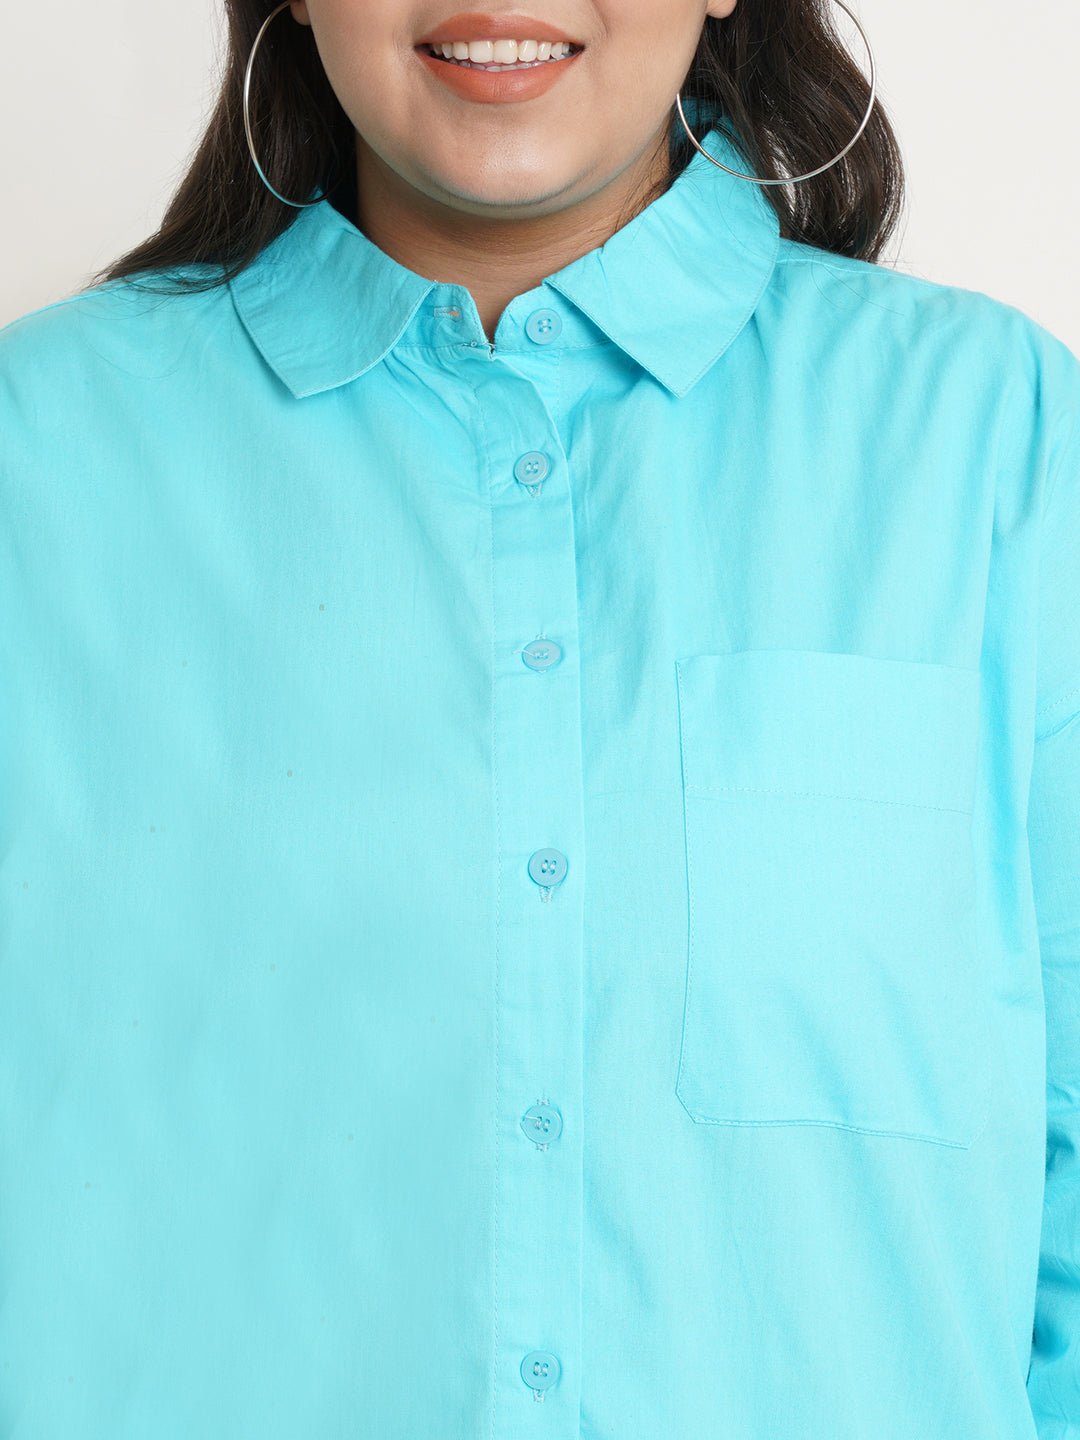 Women Turquoise Blue Full Sleeves Collar Style Plus Size Top